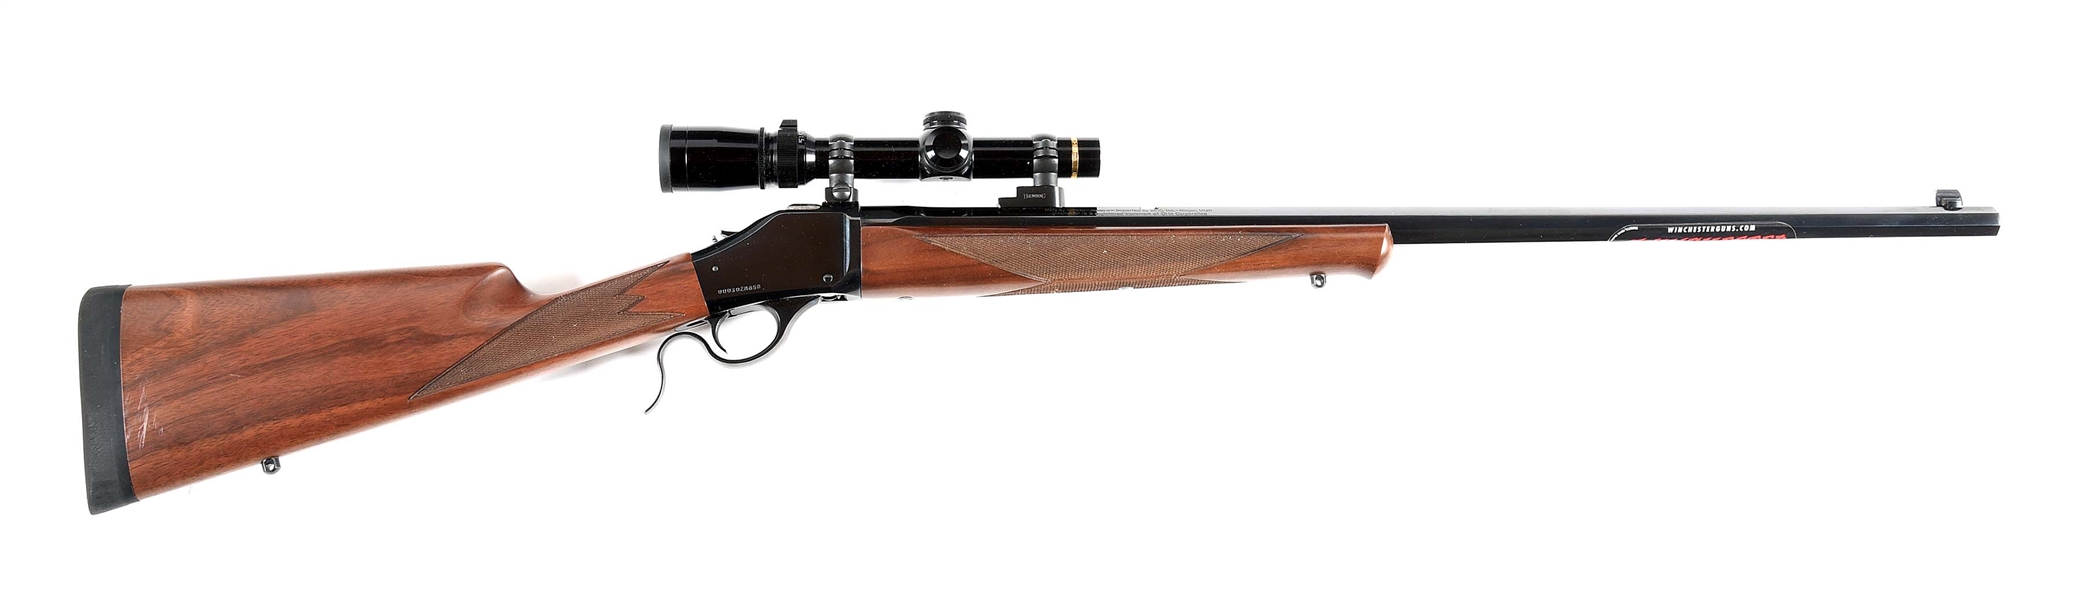 (M) WINCHESTER MODEL 1885 .300 H&H MAGNUM SINGLE SHOT RIFLE WITH LEUPOLD SCOPE.